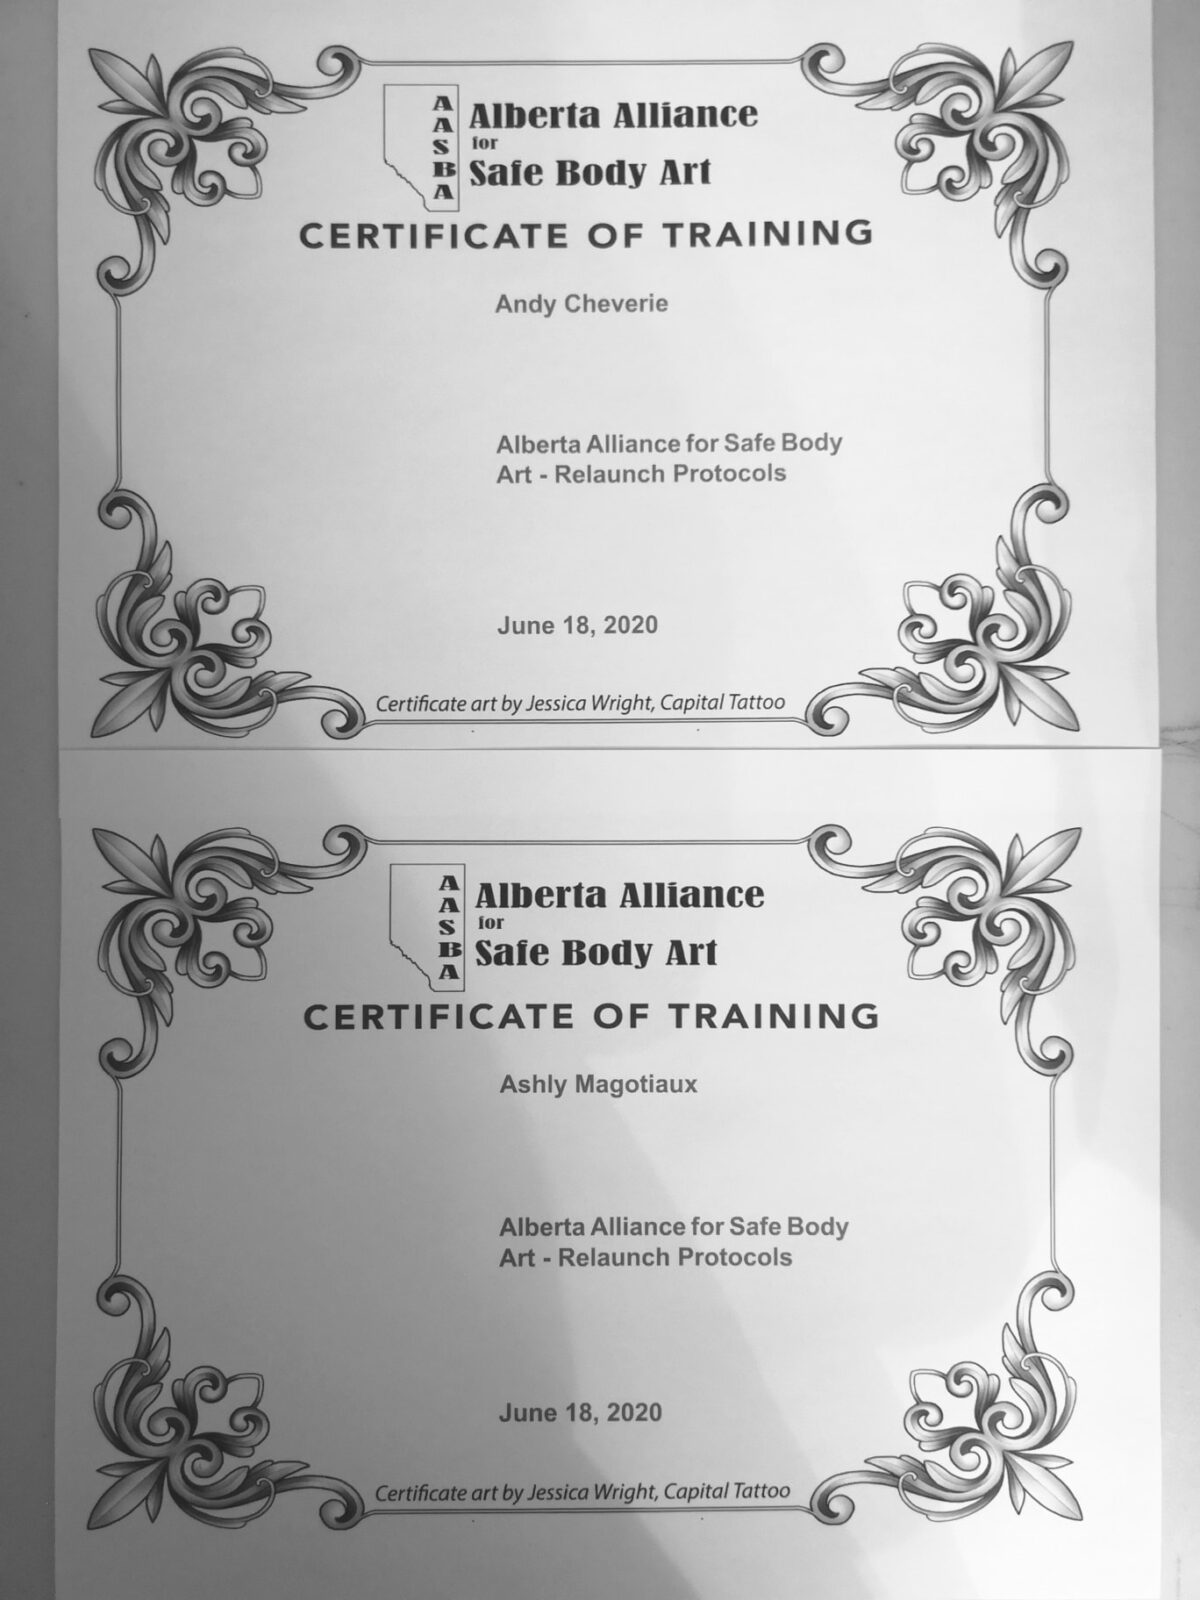 Alberta Alliance for Safe Body Art Certificate of training for both artists at Angry Monkey.